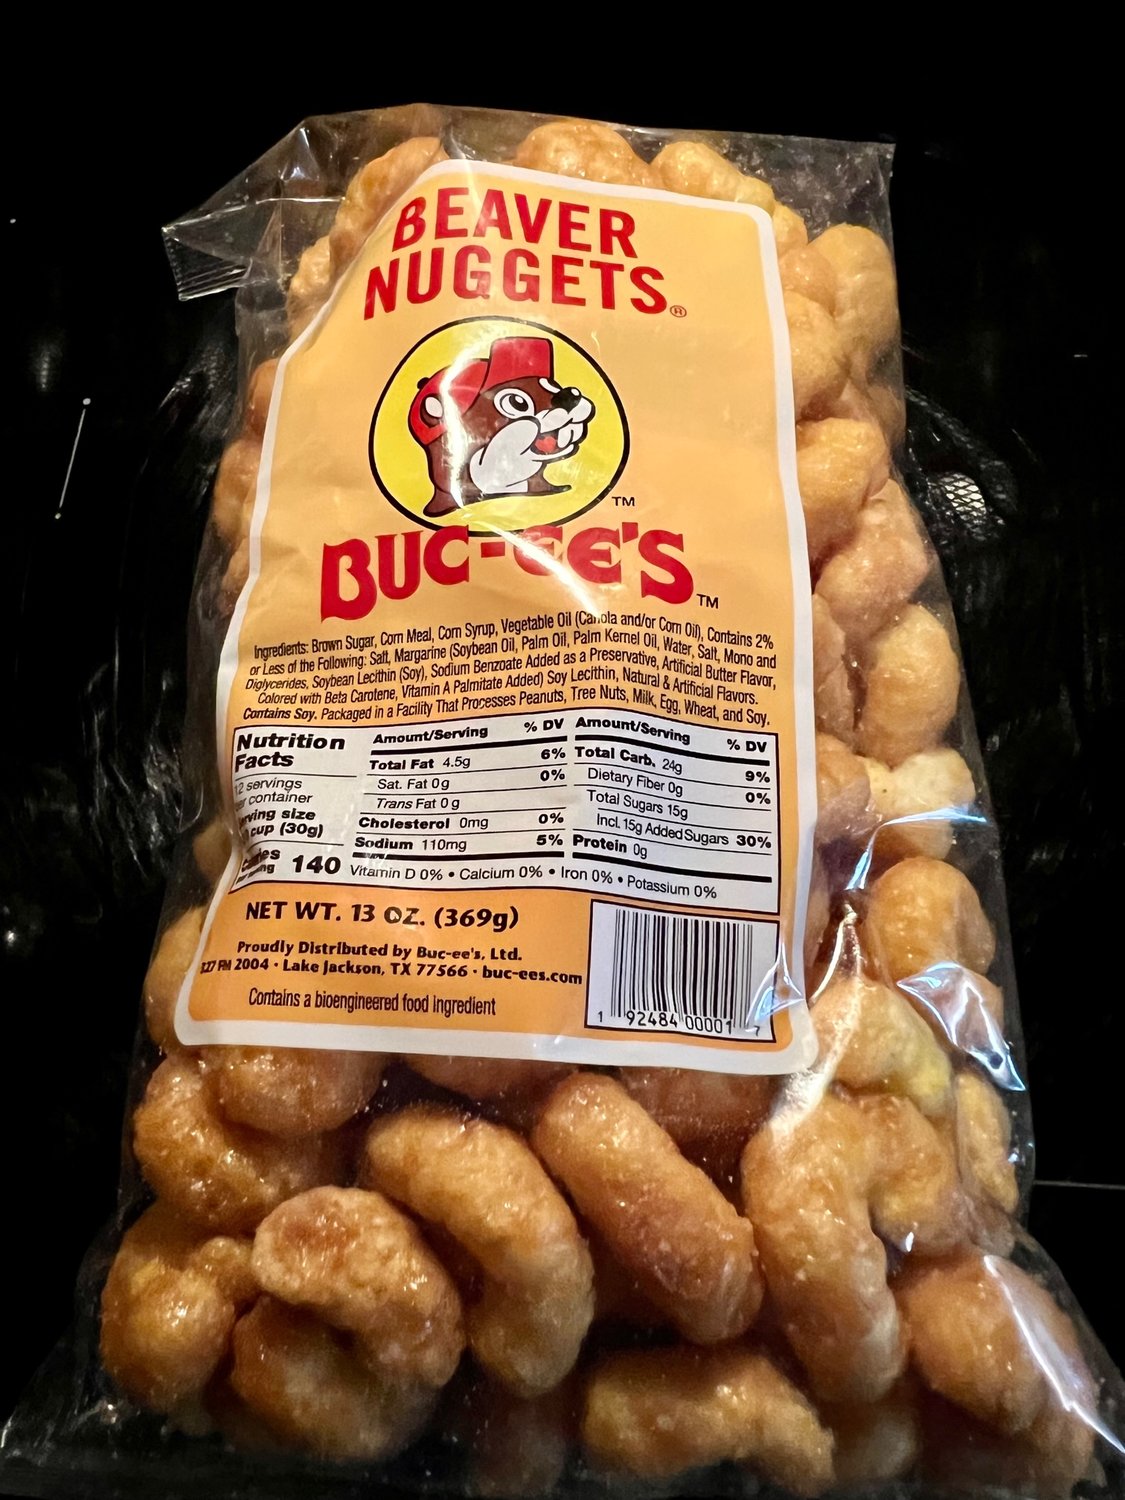 Beaver Nuggets are a snack reminiscent of Sugar Pops cereal.